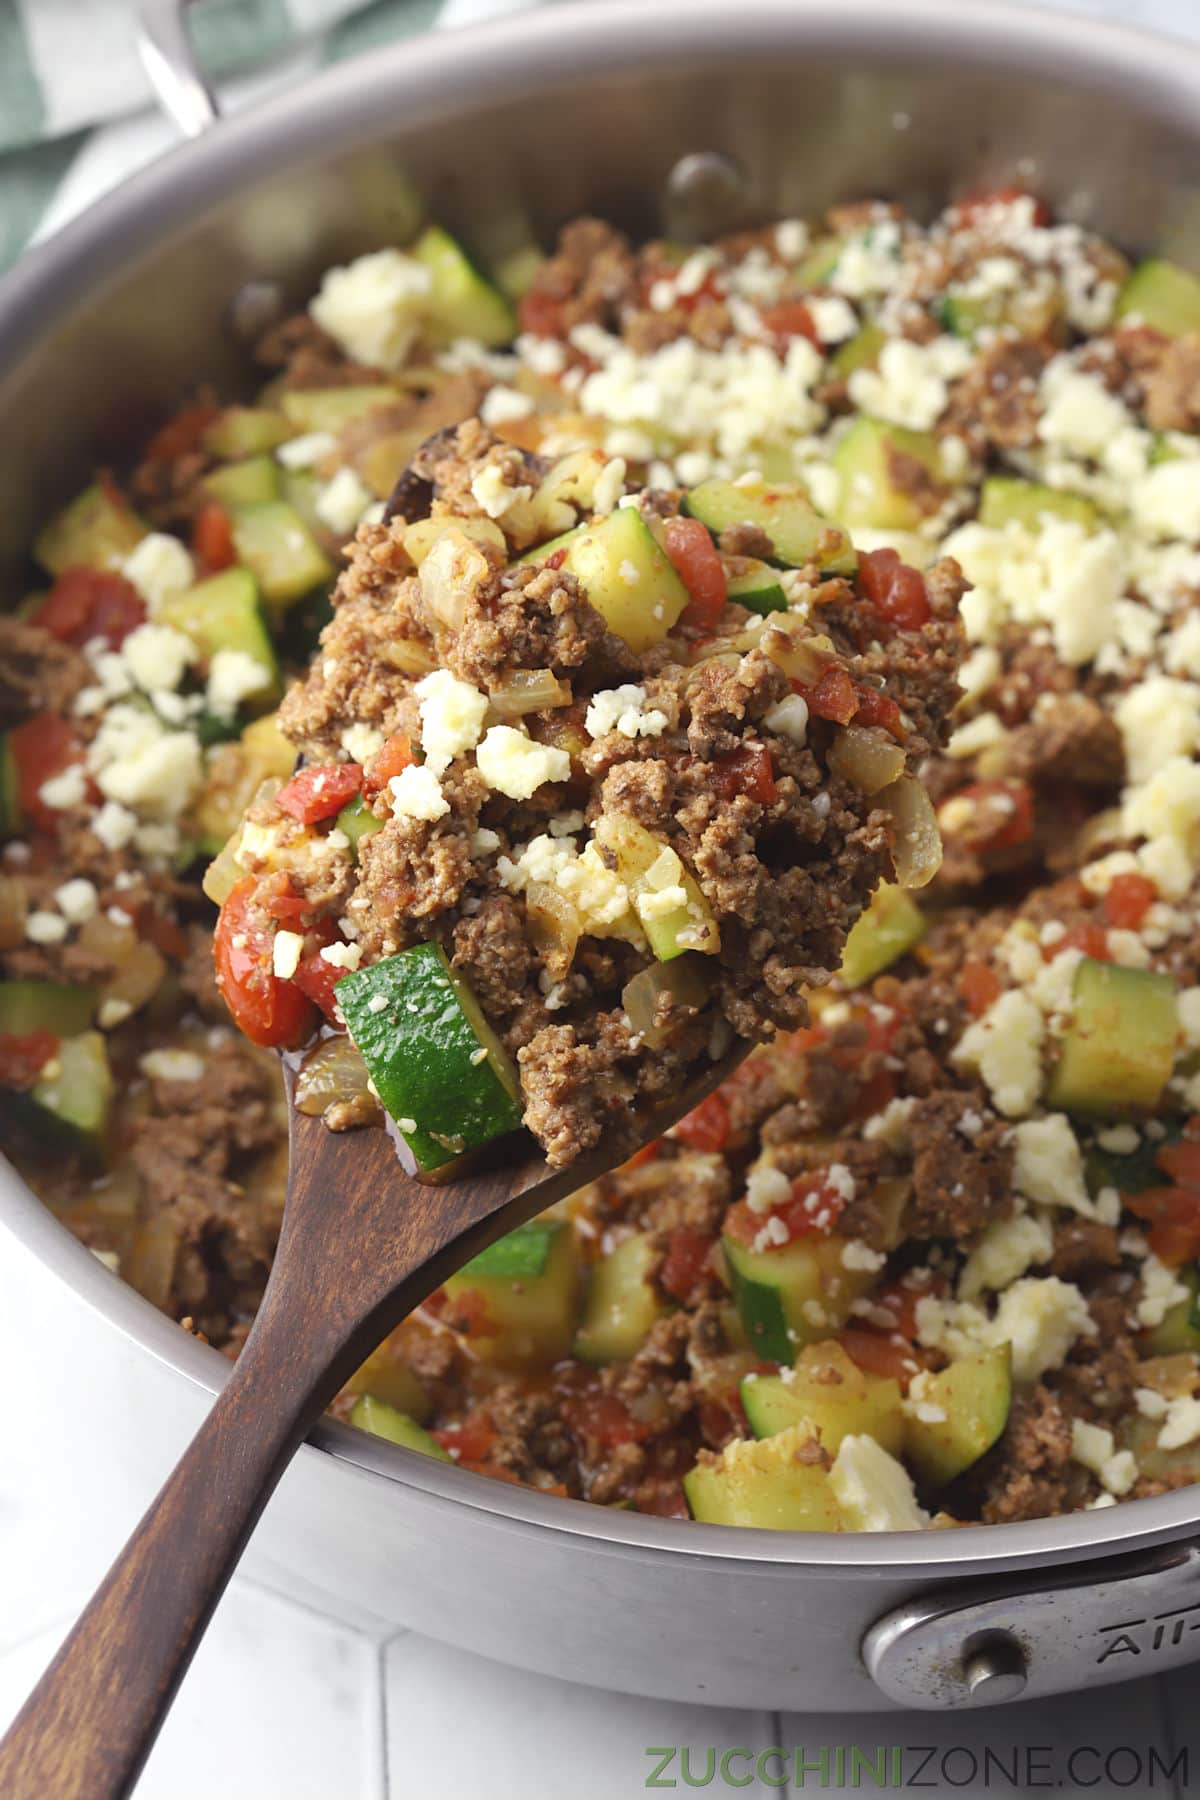 A wooden spatula filled with ground beef, zucchini, and tomatoes.